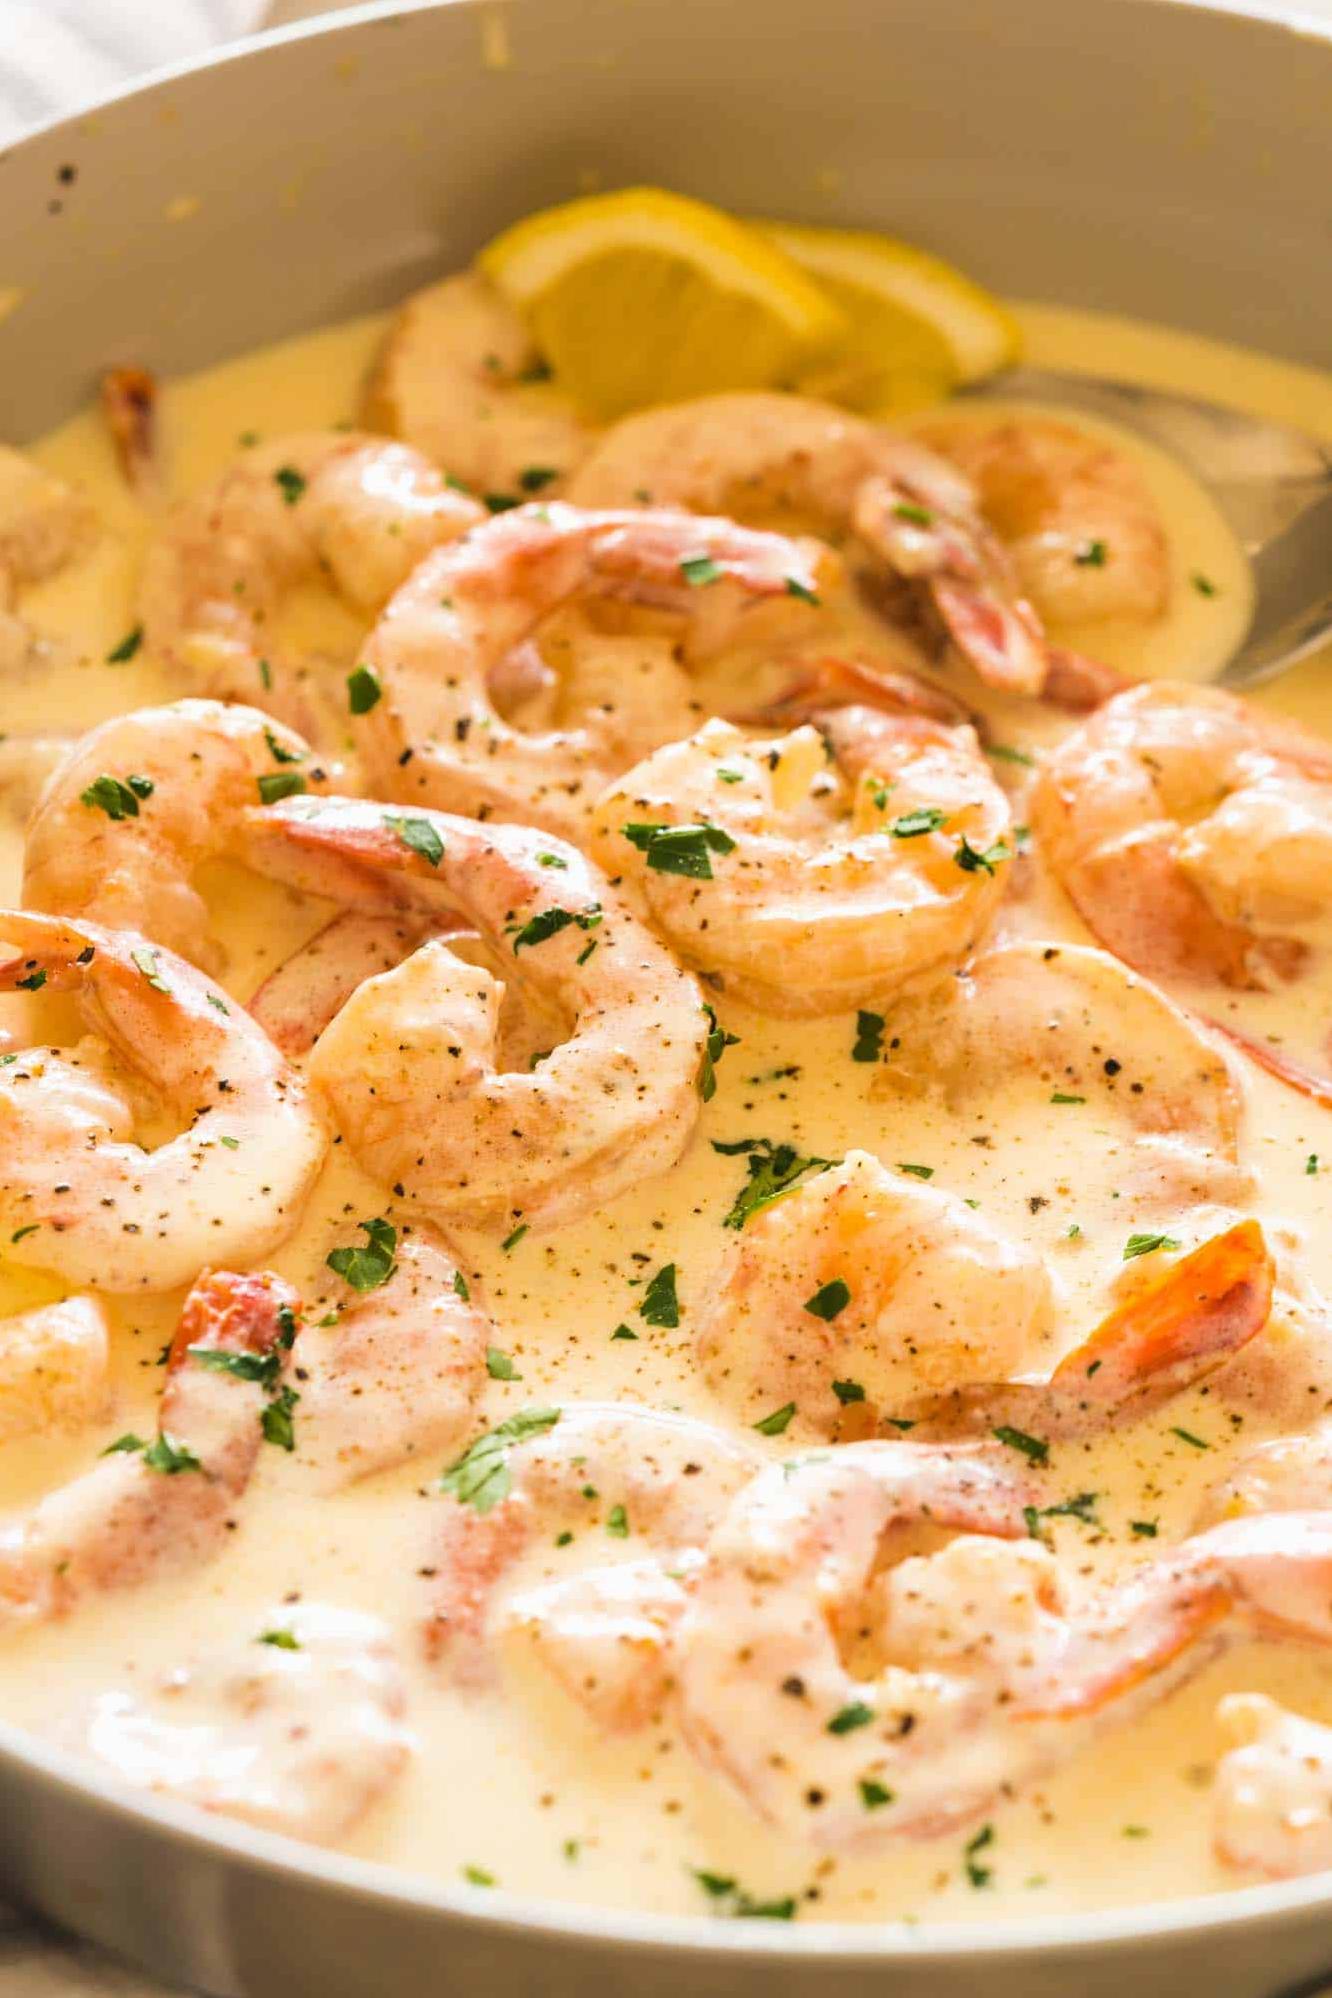  Mouthwatering shrimp cooked to perfection